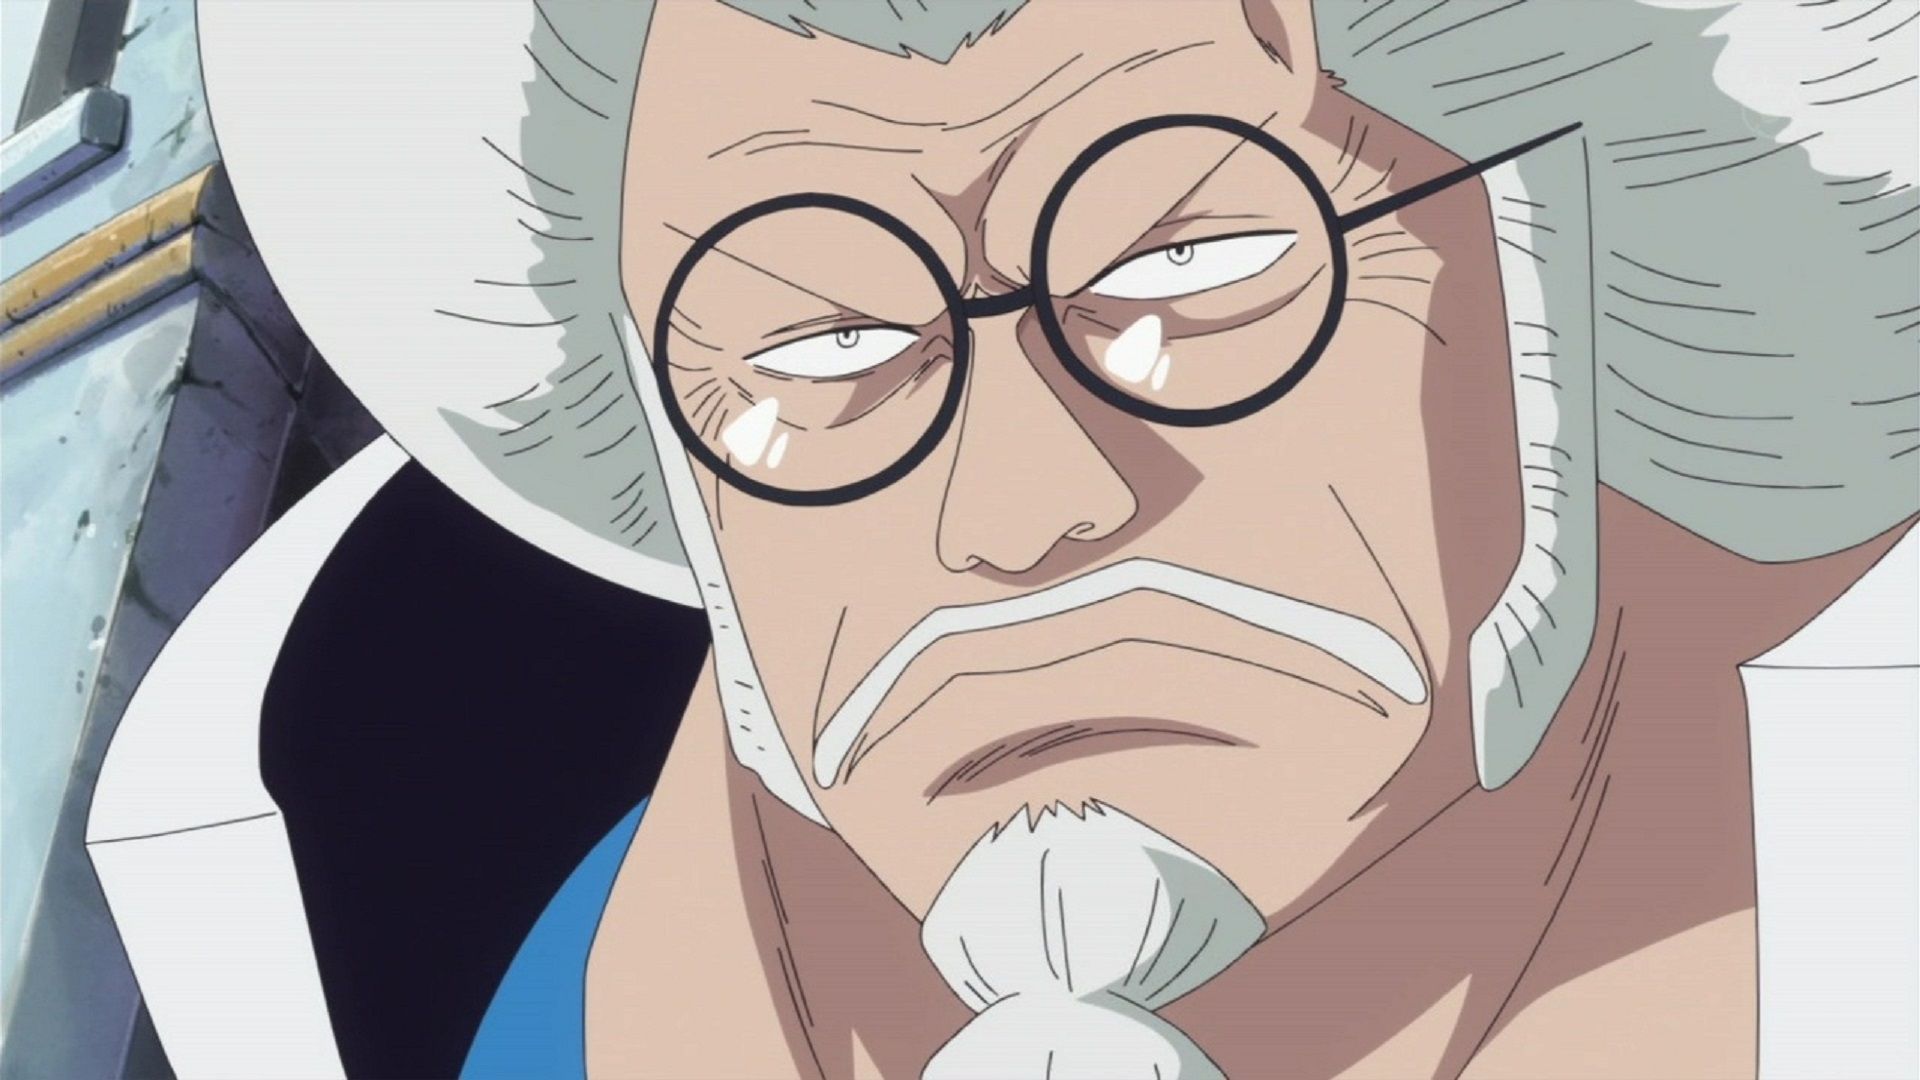 Sengoku in his current aged incarnation (Image via Toei Animation, One Piece)